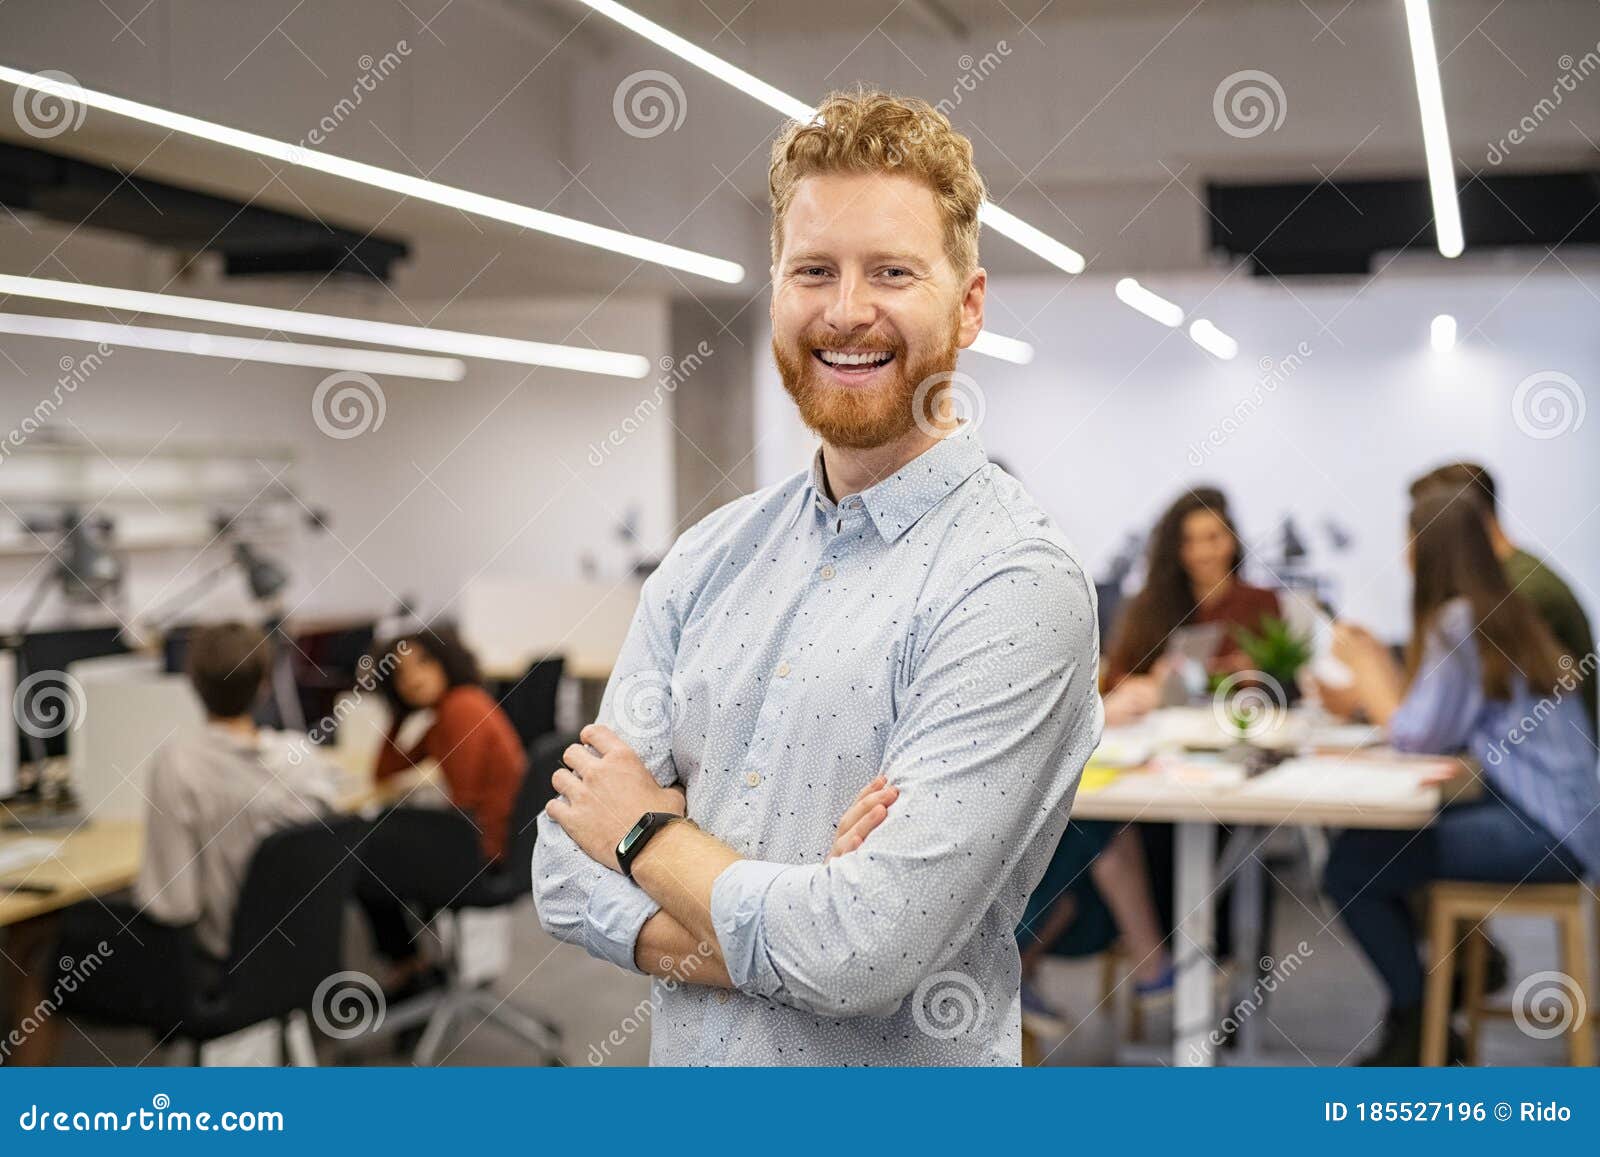 Successful Business Man Smiling in Office Stock Photo - Image of ...